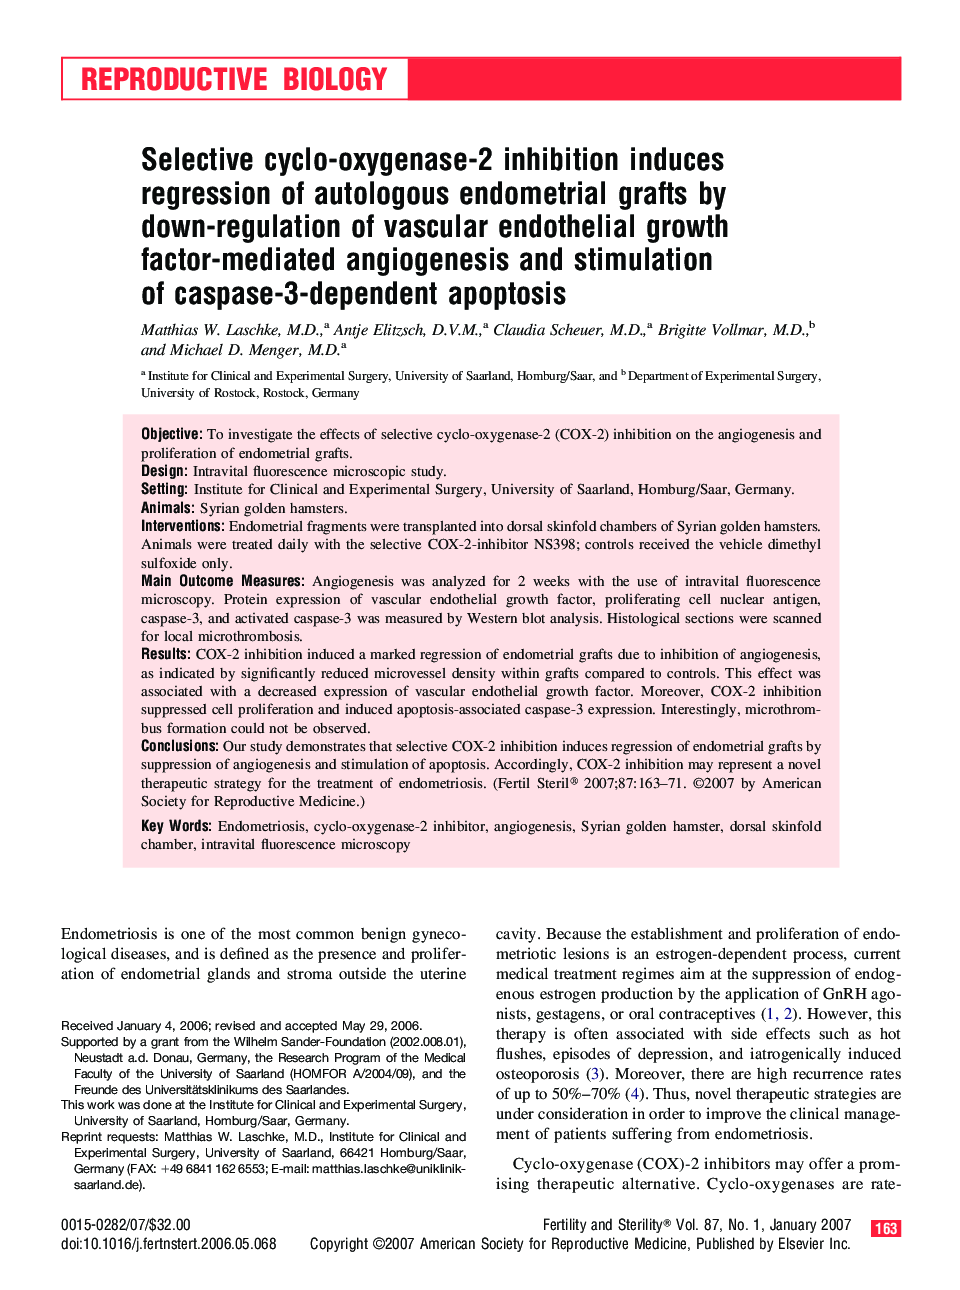 Selective cyclo-oxygenase-2 inhibition induces regression of autologous endometrial grafts by down-regulation of vascular endothelial growth factor-mediated angiogenesis and stimulation of caspase-3-dependent apoptosis 